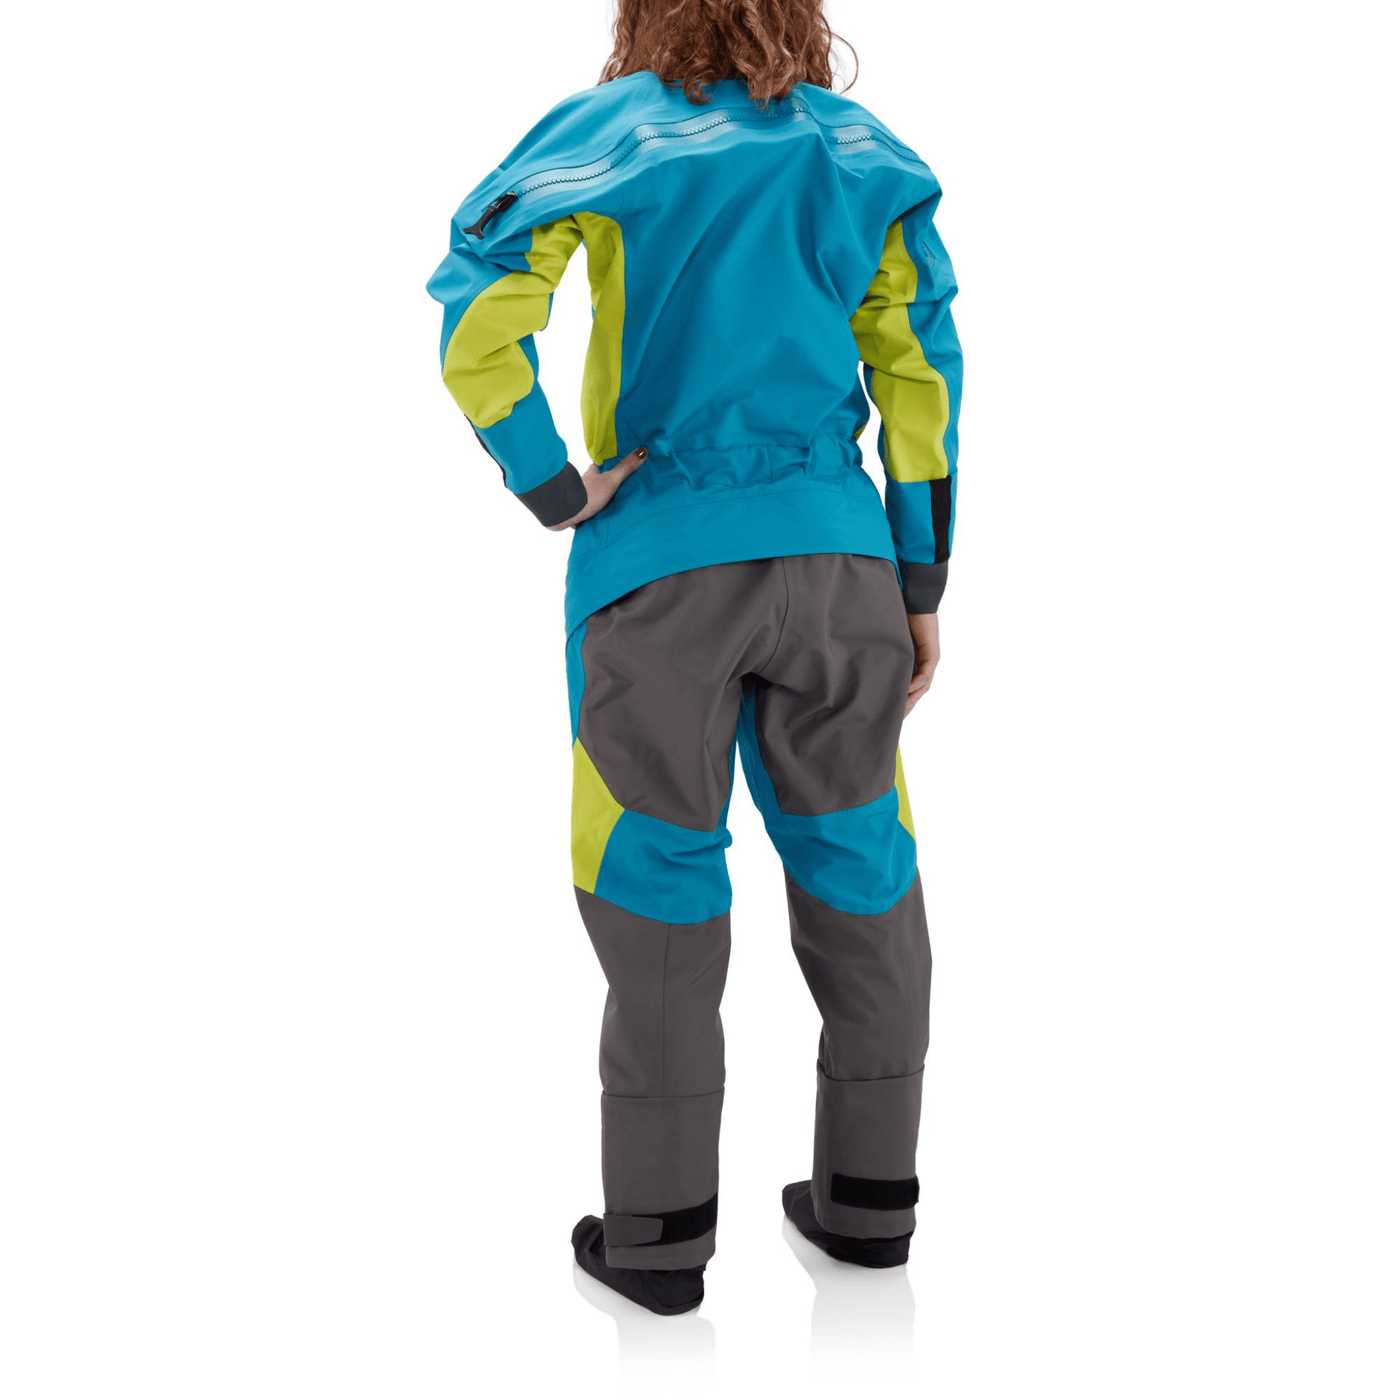 NRS Explorer Comfort-Neck Dry Suit Womens | Paddle Dry Suits | Further Faster Christchurch NZ #fjordnrs